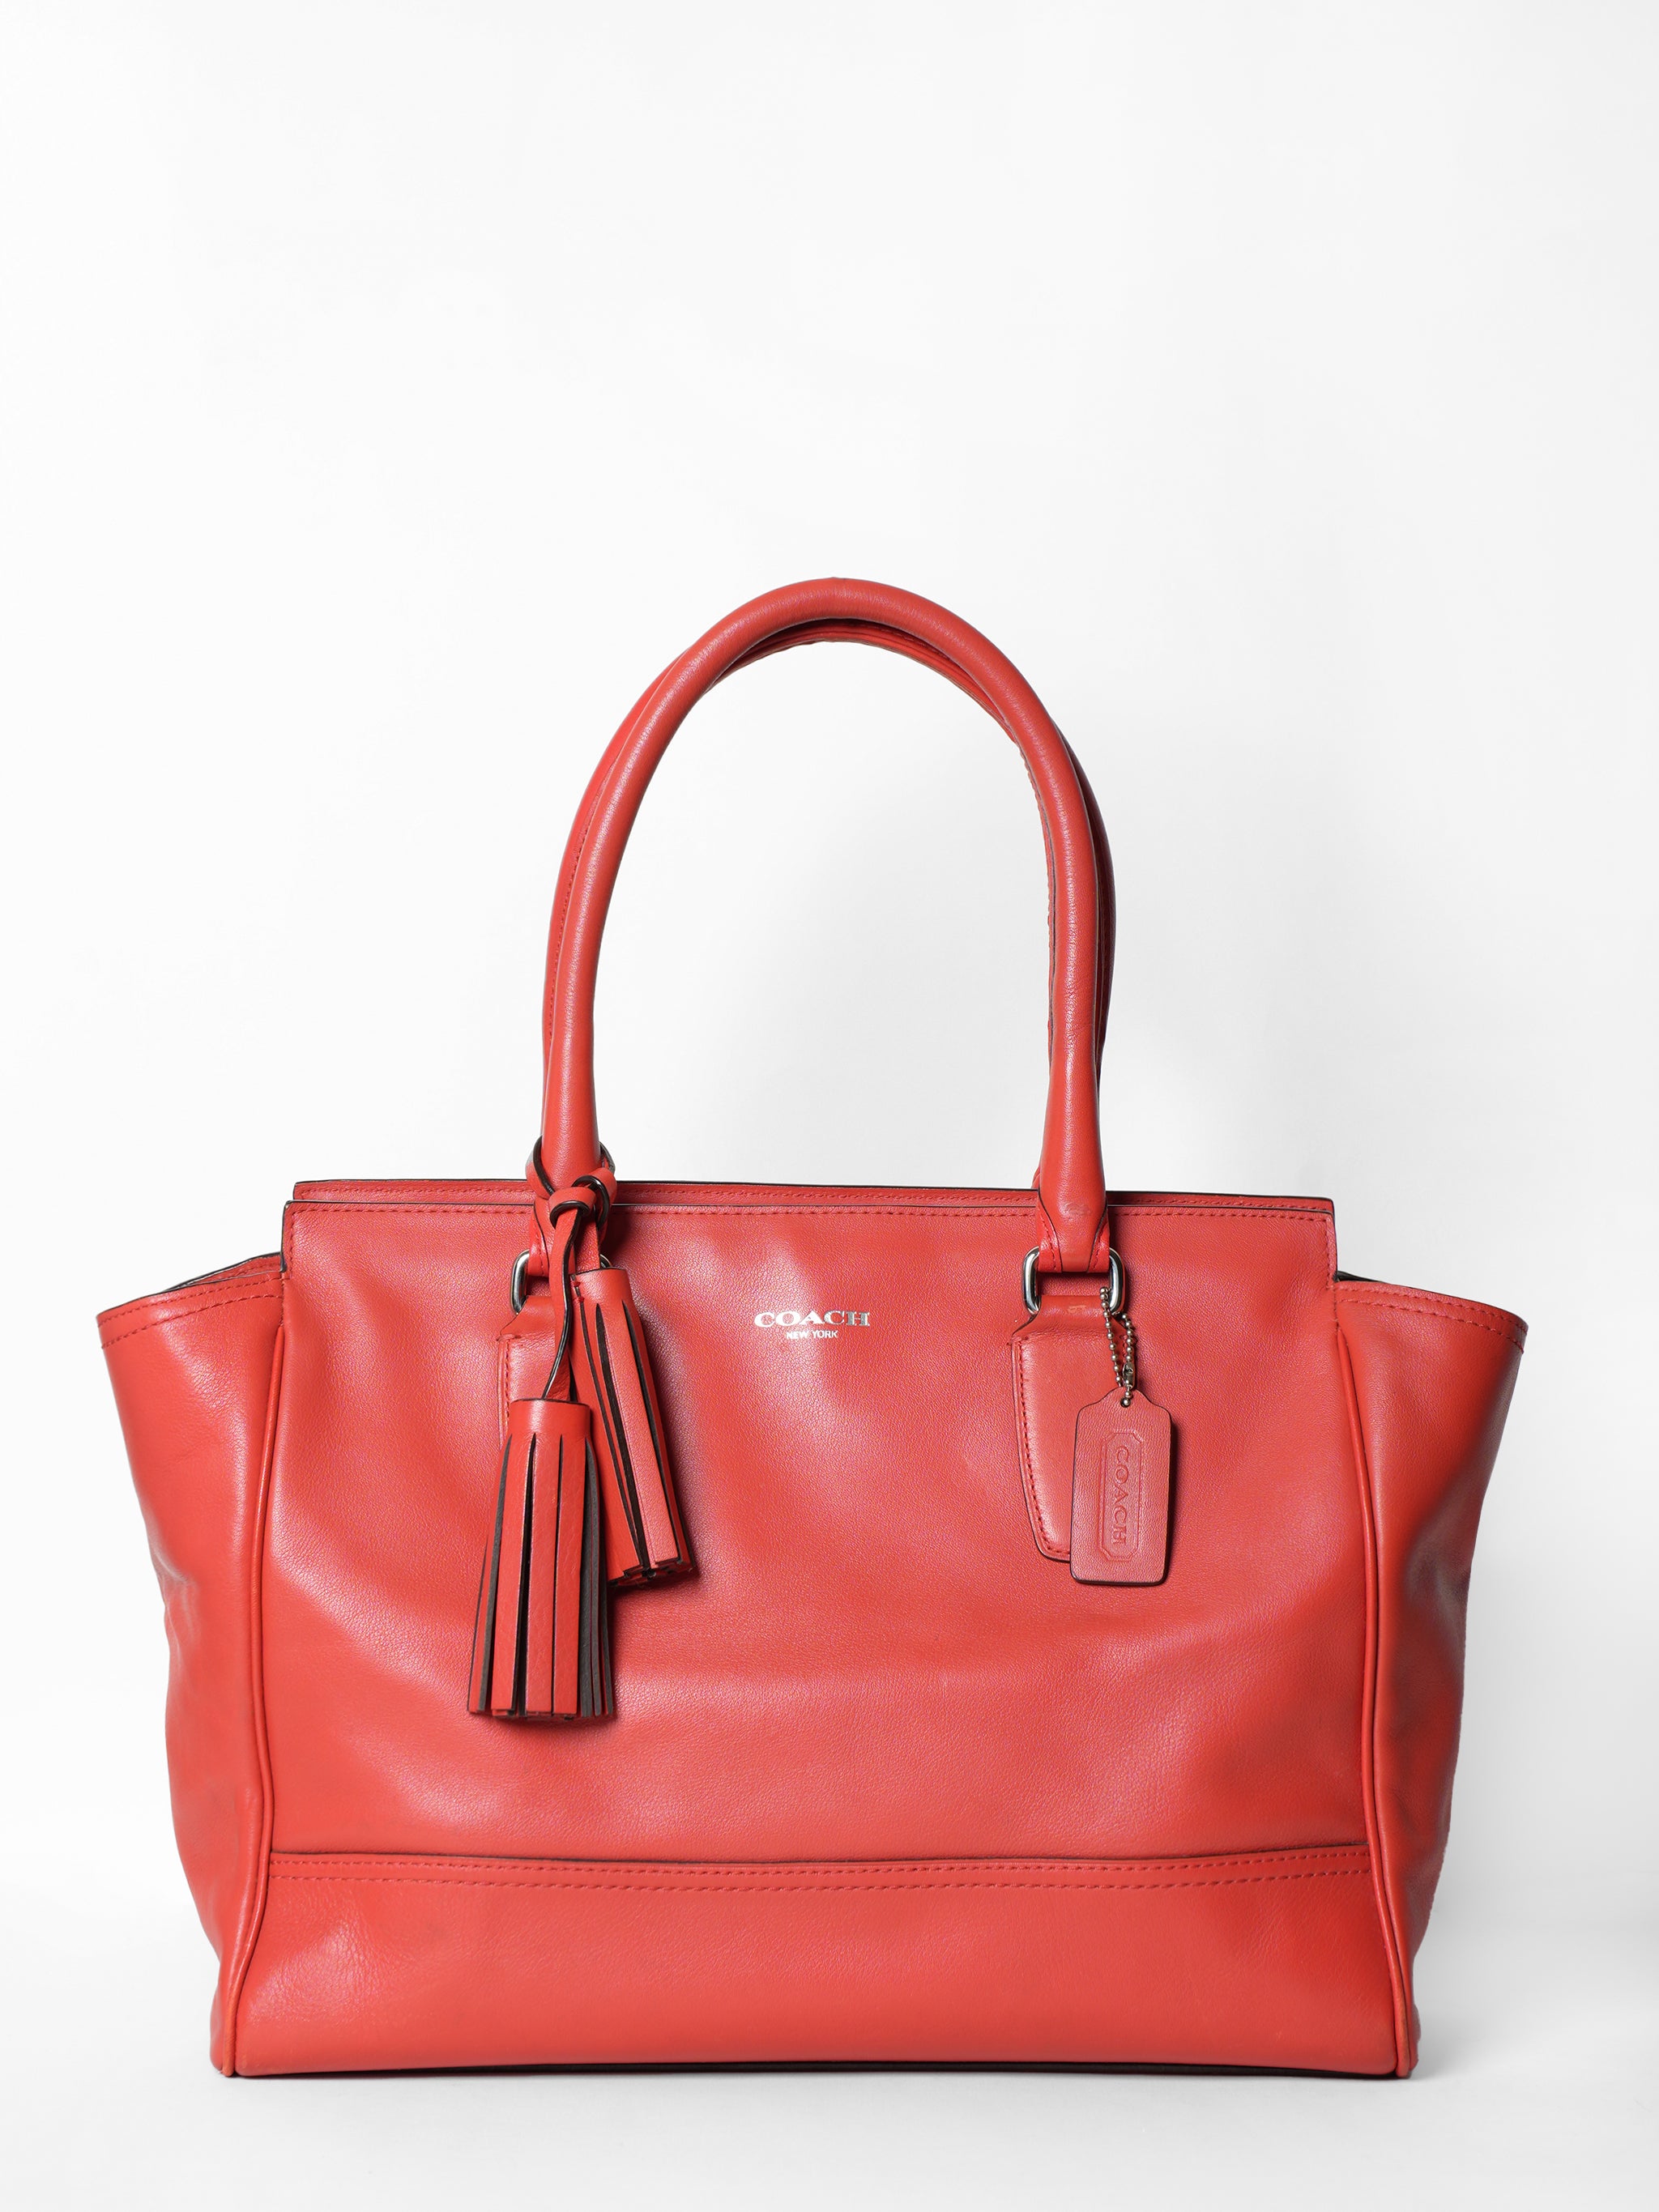 Coach Legacy Candace Red Leather Handbag